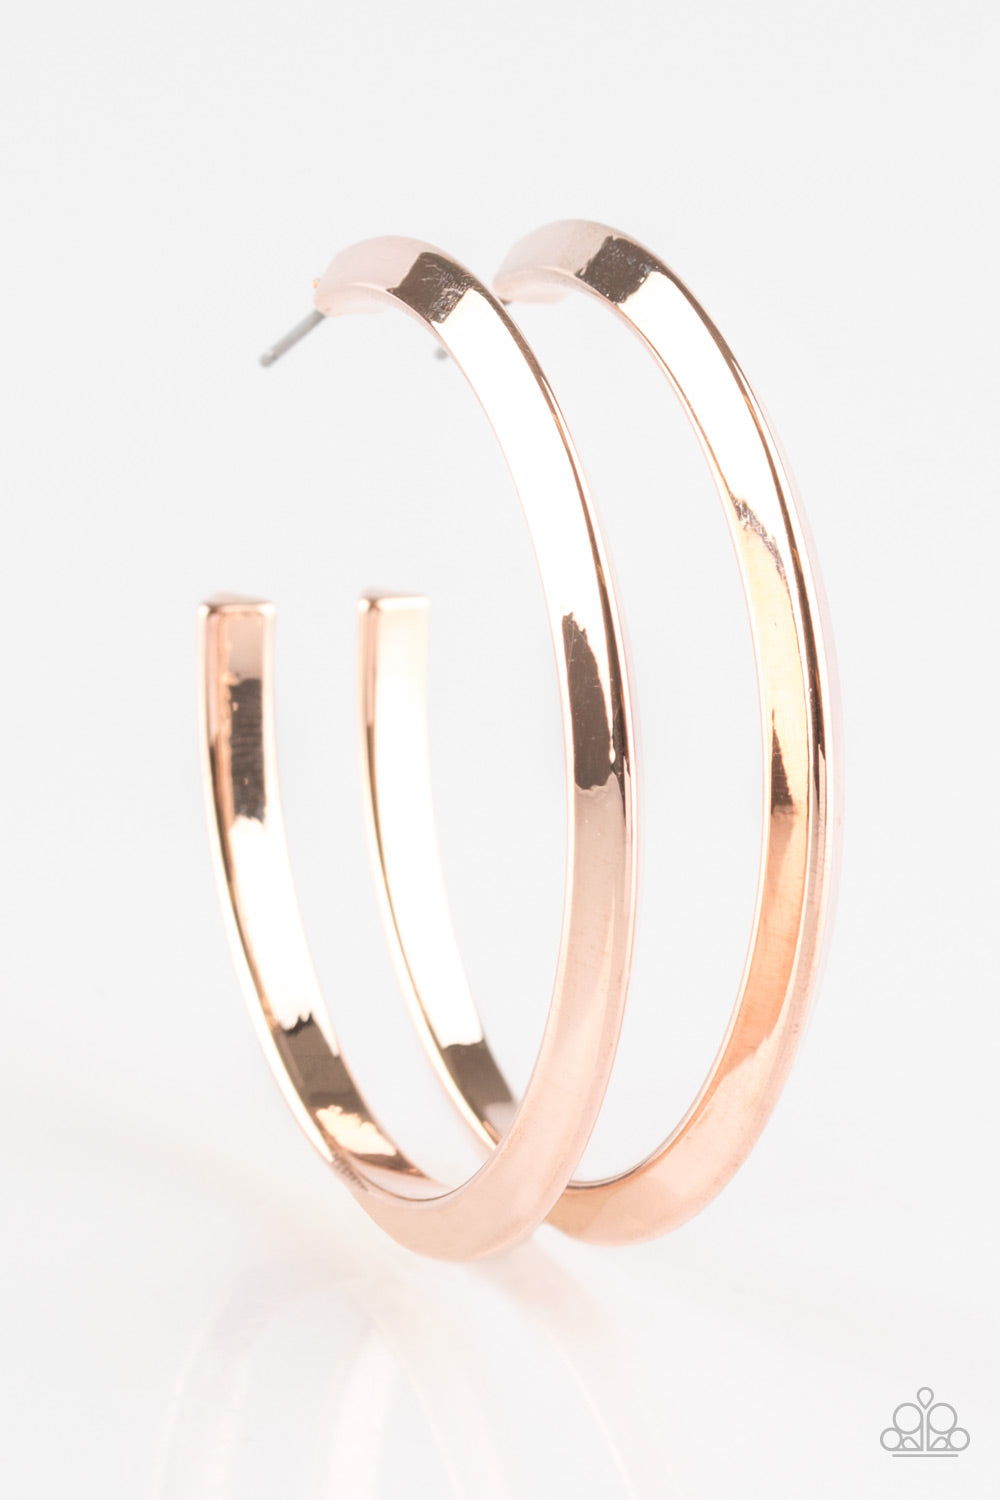 Paparazzi Accessories Some Like it HAUTE - Rose Gold Hoop Earrings - Lady T Accessories